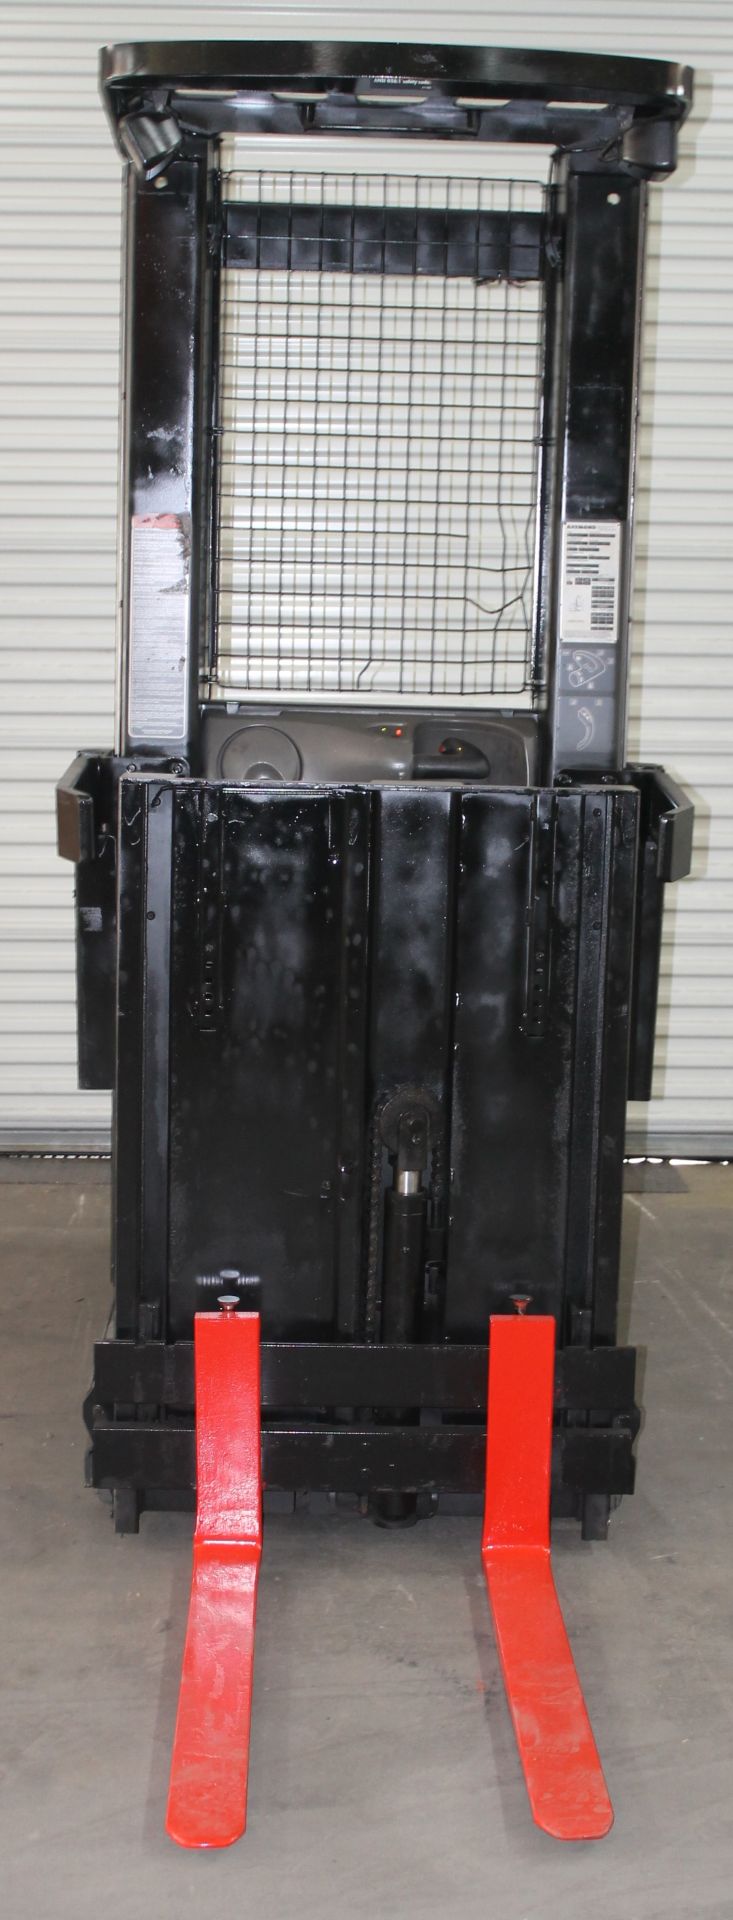 2003 RAYMOND ORDER PICKER WITH ERGO LIFT / MINI MAST FEATURE, CLICK HERE TO WATCH VIDEO - Image 5 of 8